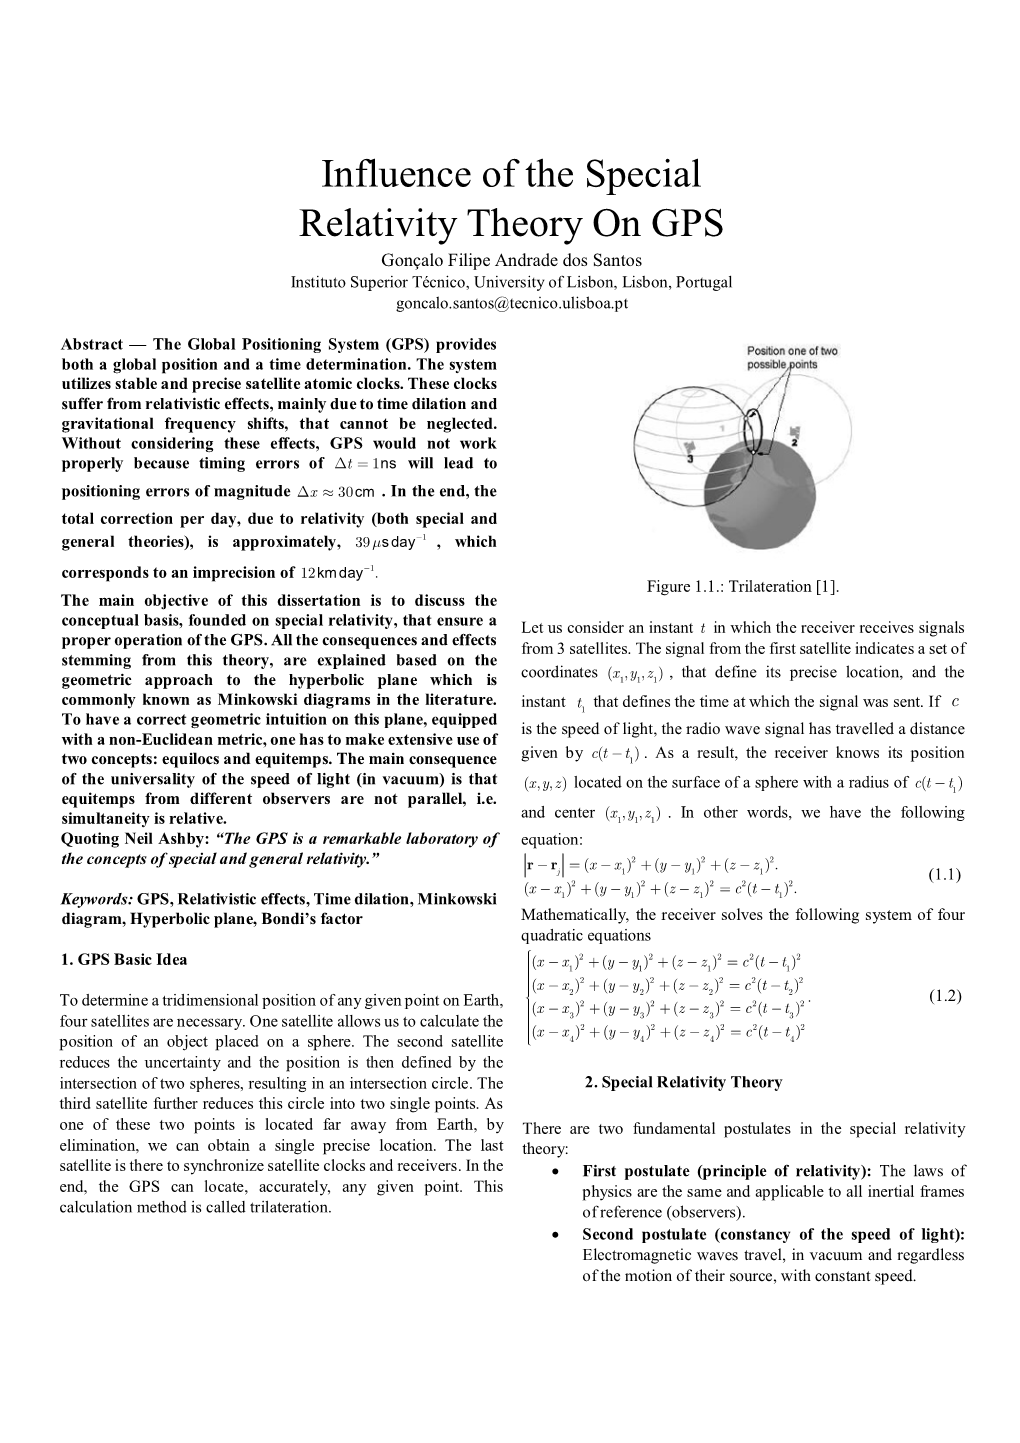 Influence of the Special Relativity Theory On